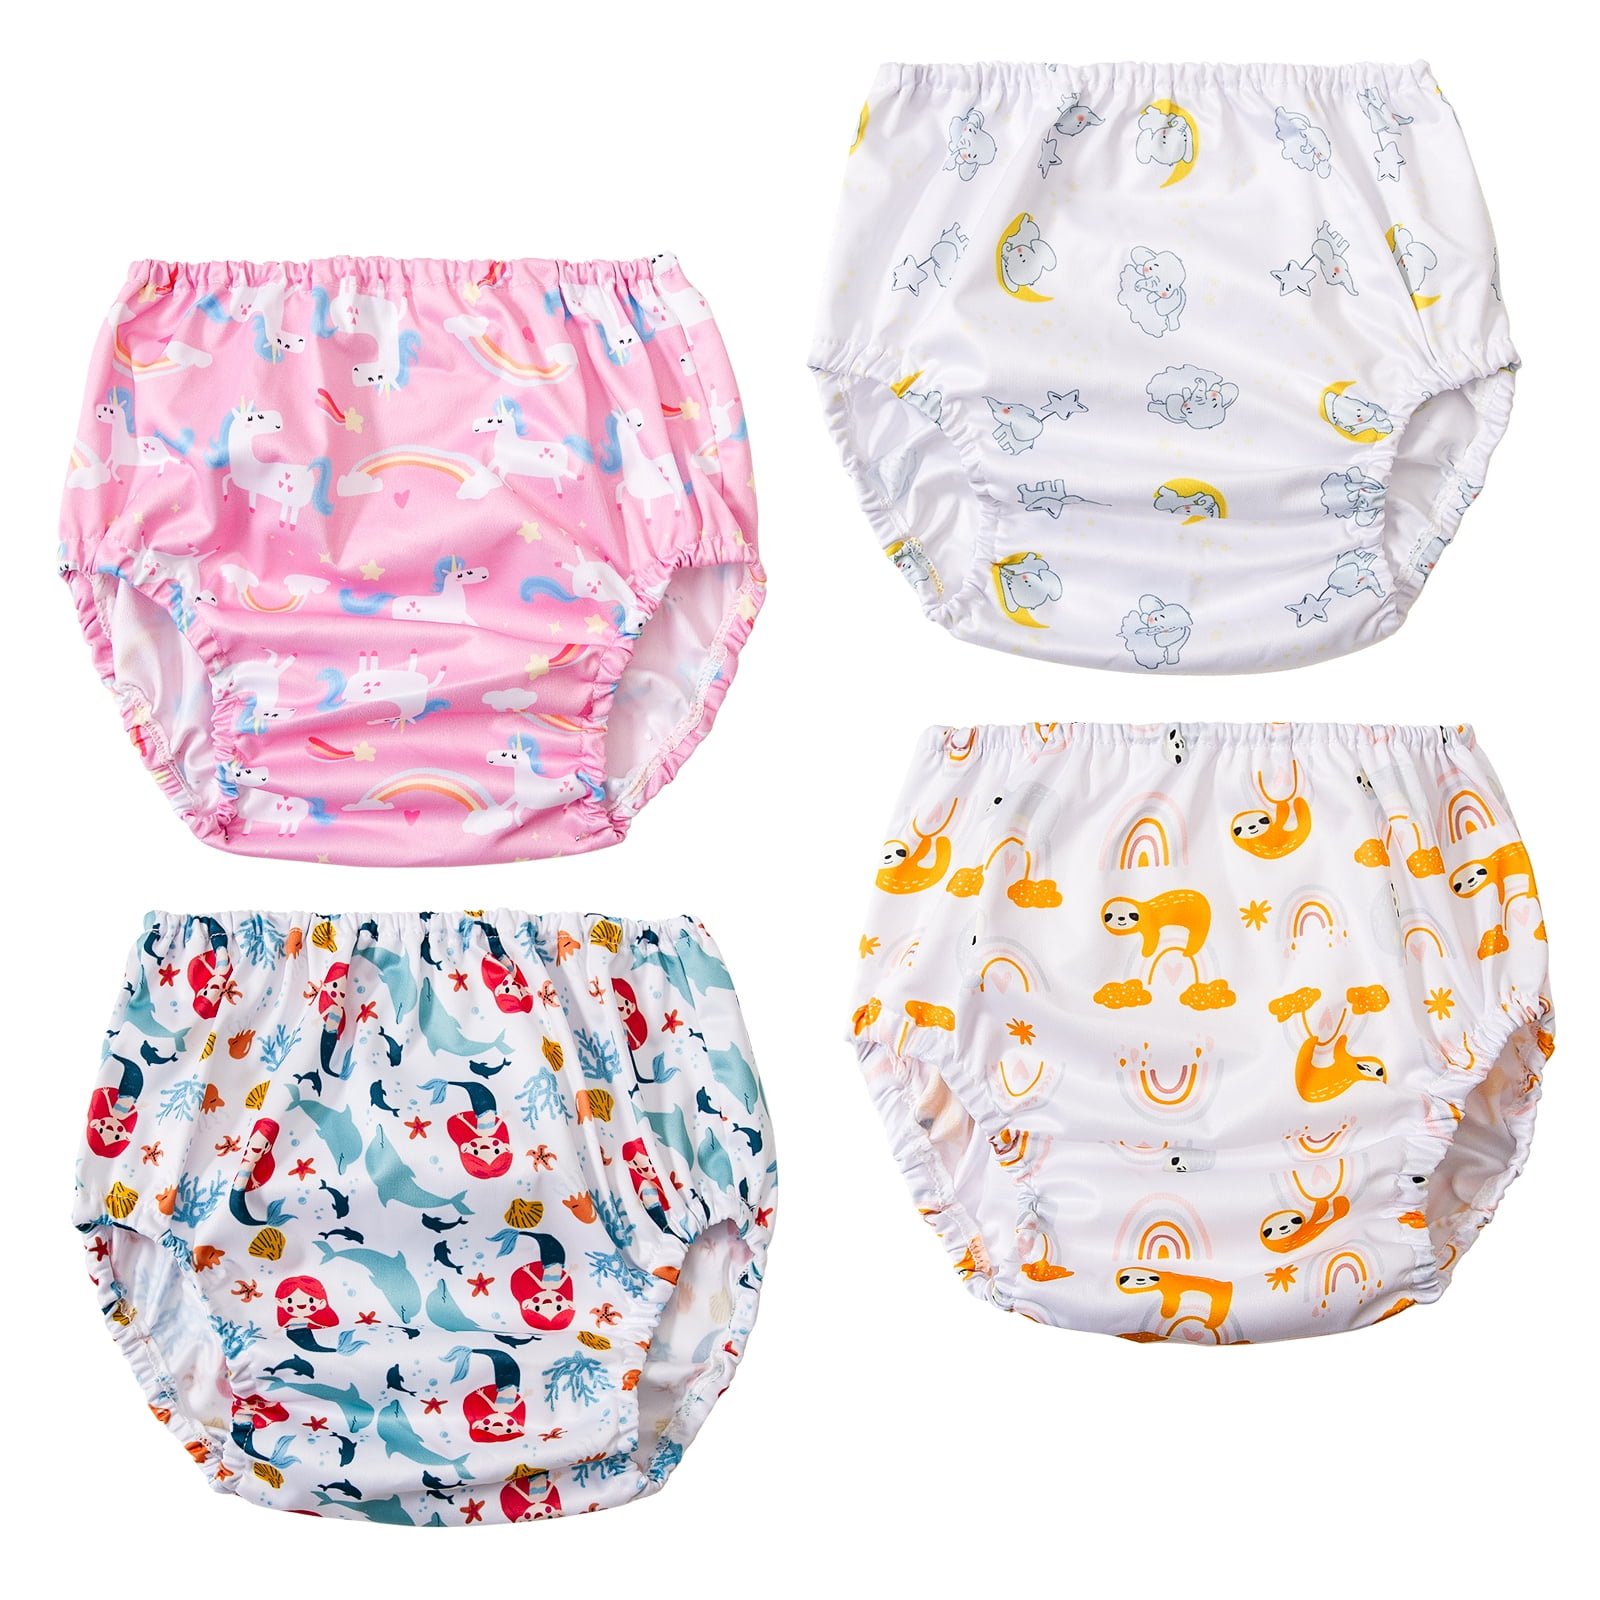 Diaper Cover Plastic Underwear Covers for Potty Training Diaper Covers ...